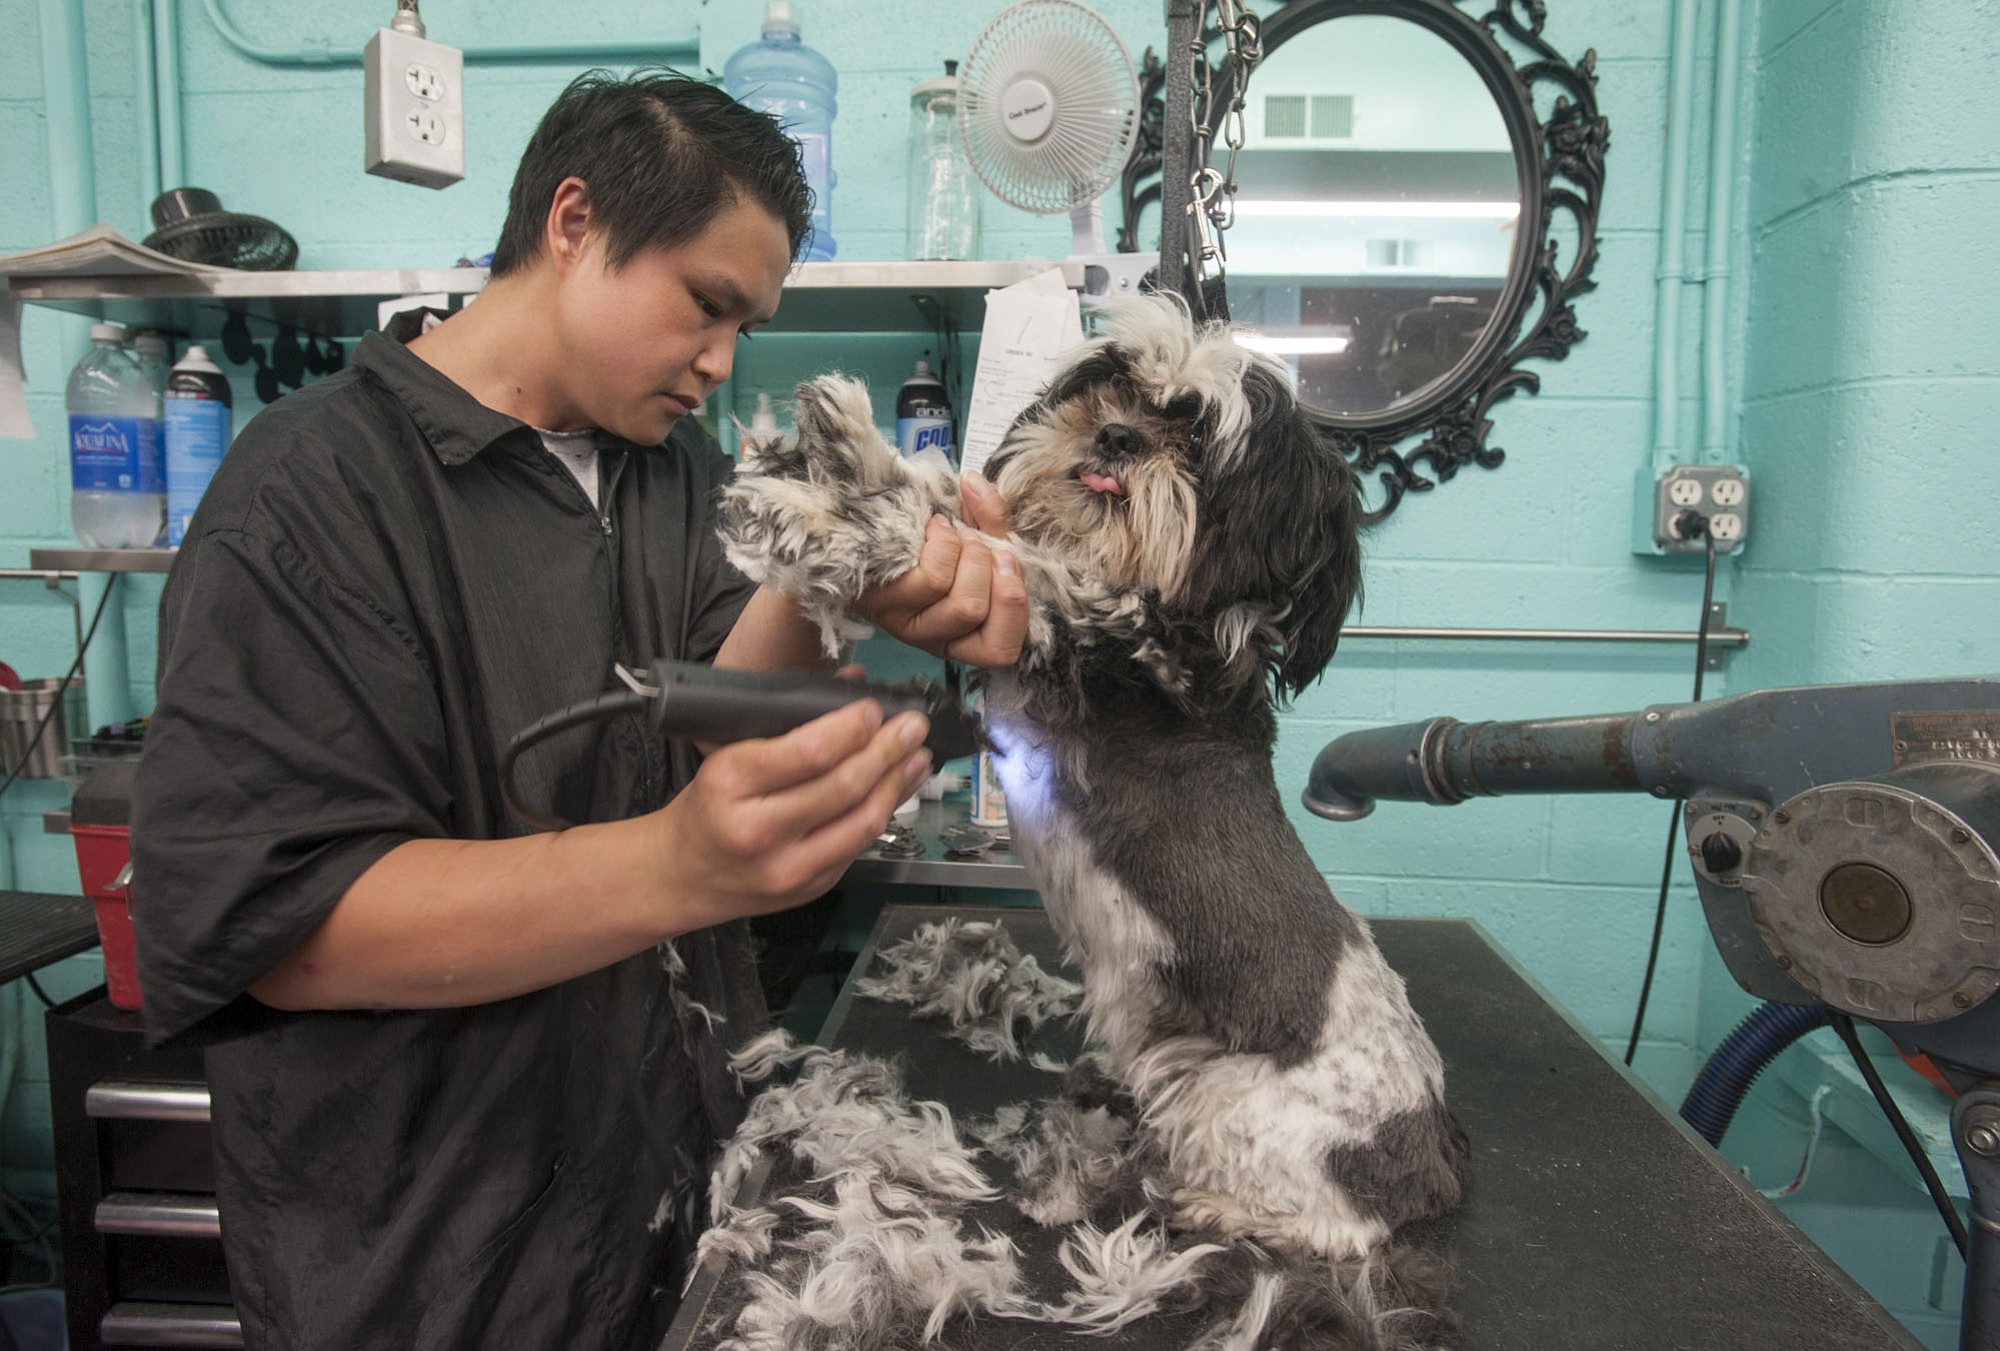 Jordan Mui shaves a Shih Tzu named Diesel at Franko's Dog and Cat grooming in Vancouver on Monday. The salon grooms 125 to 175 dogs and cats per day and has seen a sharp uptick in the number of shavings due to the recent hot weather.